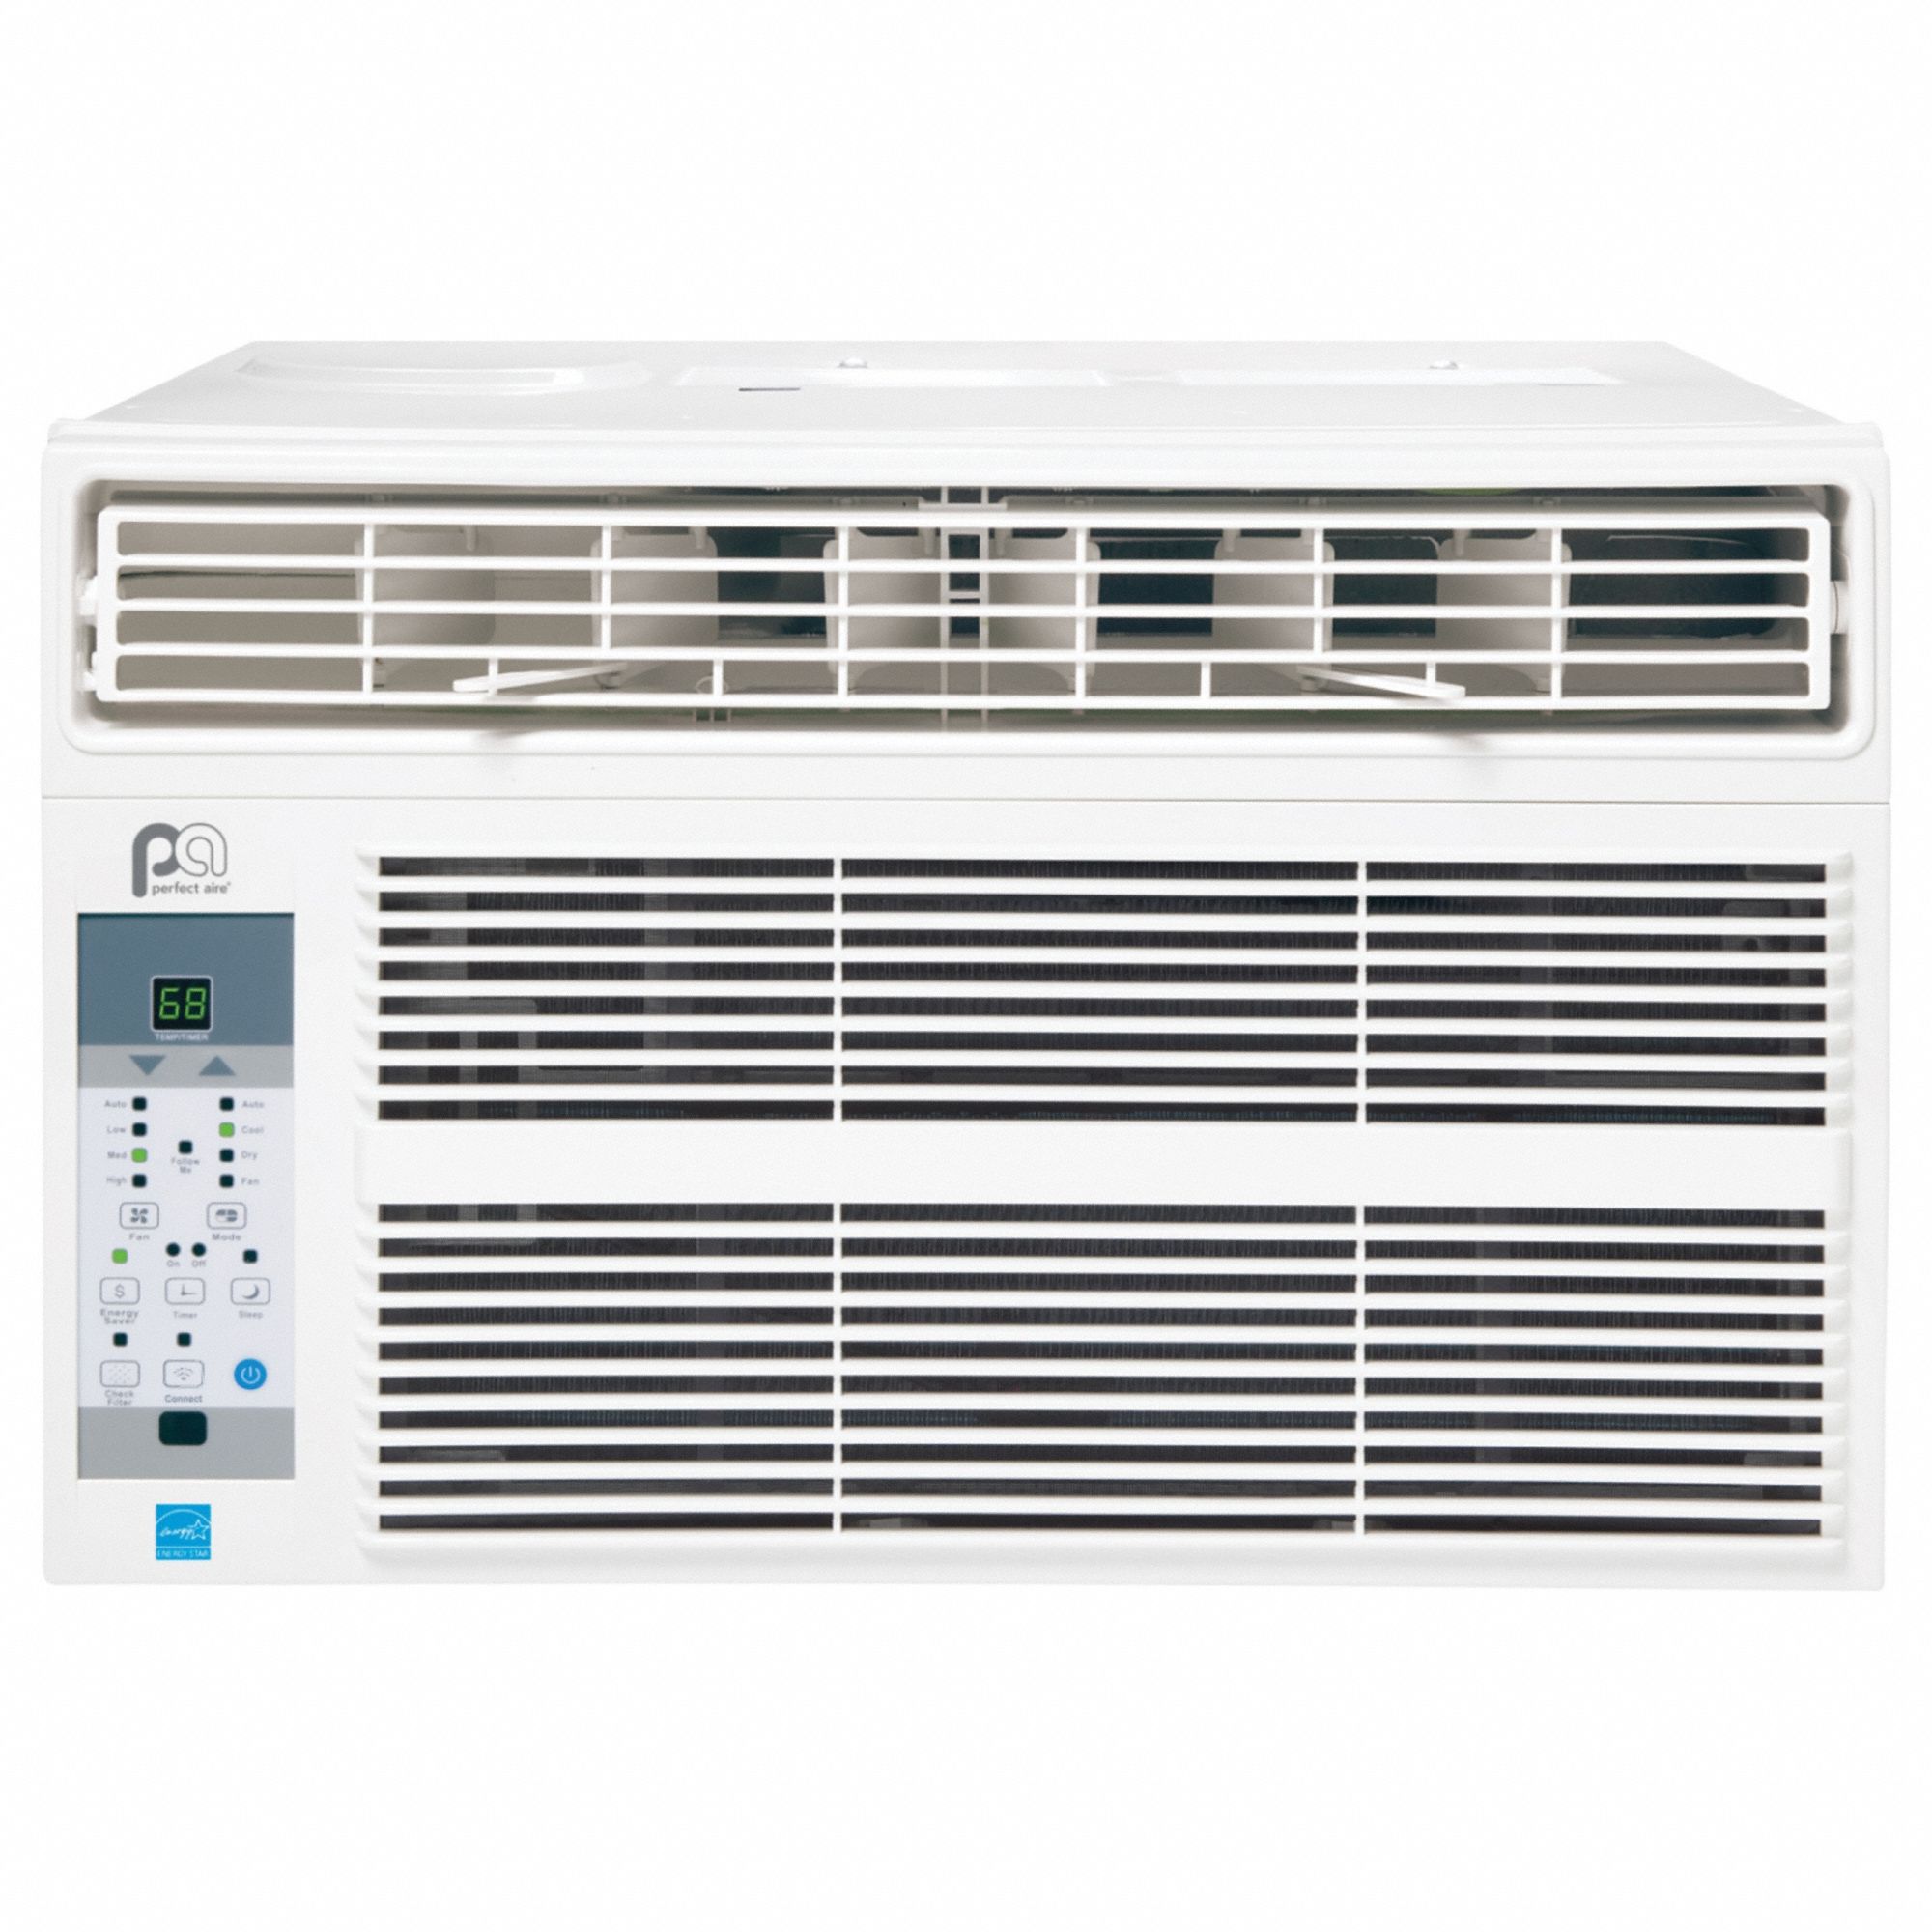 Window Air Conditioner: 14,500 BtuH, 550 to 700 sq ft, 115V AC – 5-15P, Cooling Only